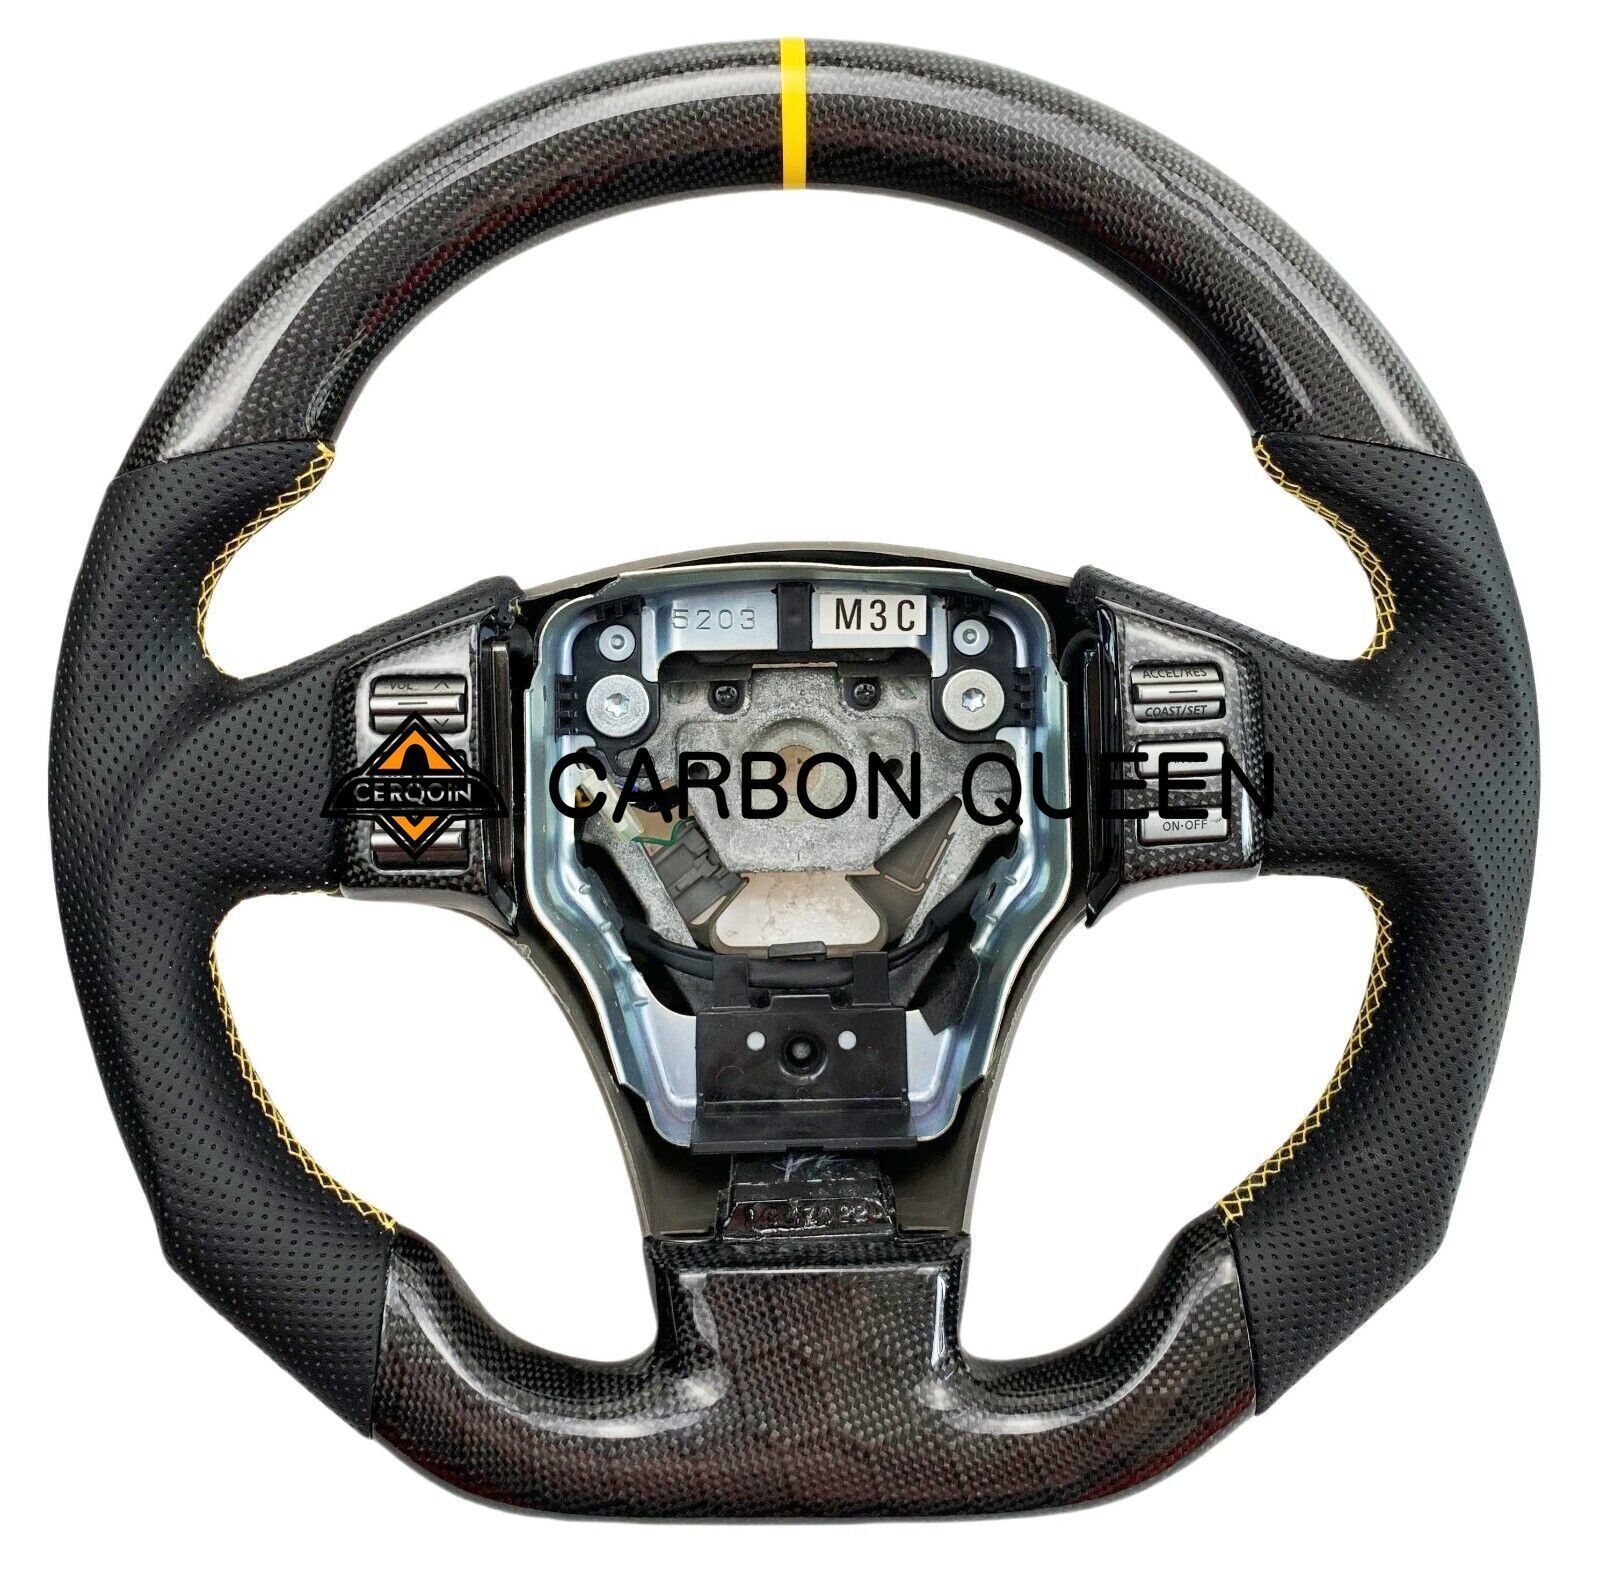 HONEYCOMB CARBON FIBER Steering Wheel FOR INFINITI g35 W/NO BUTTONS